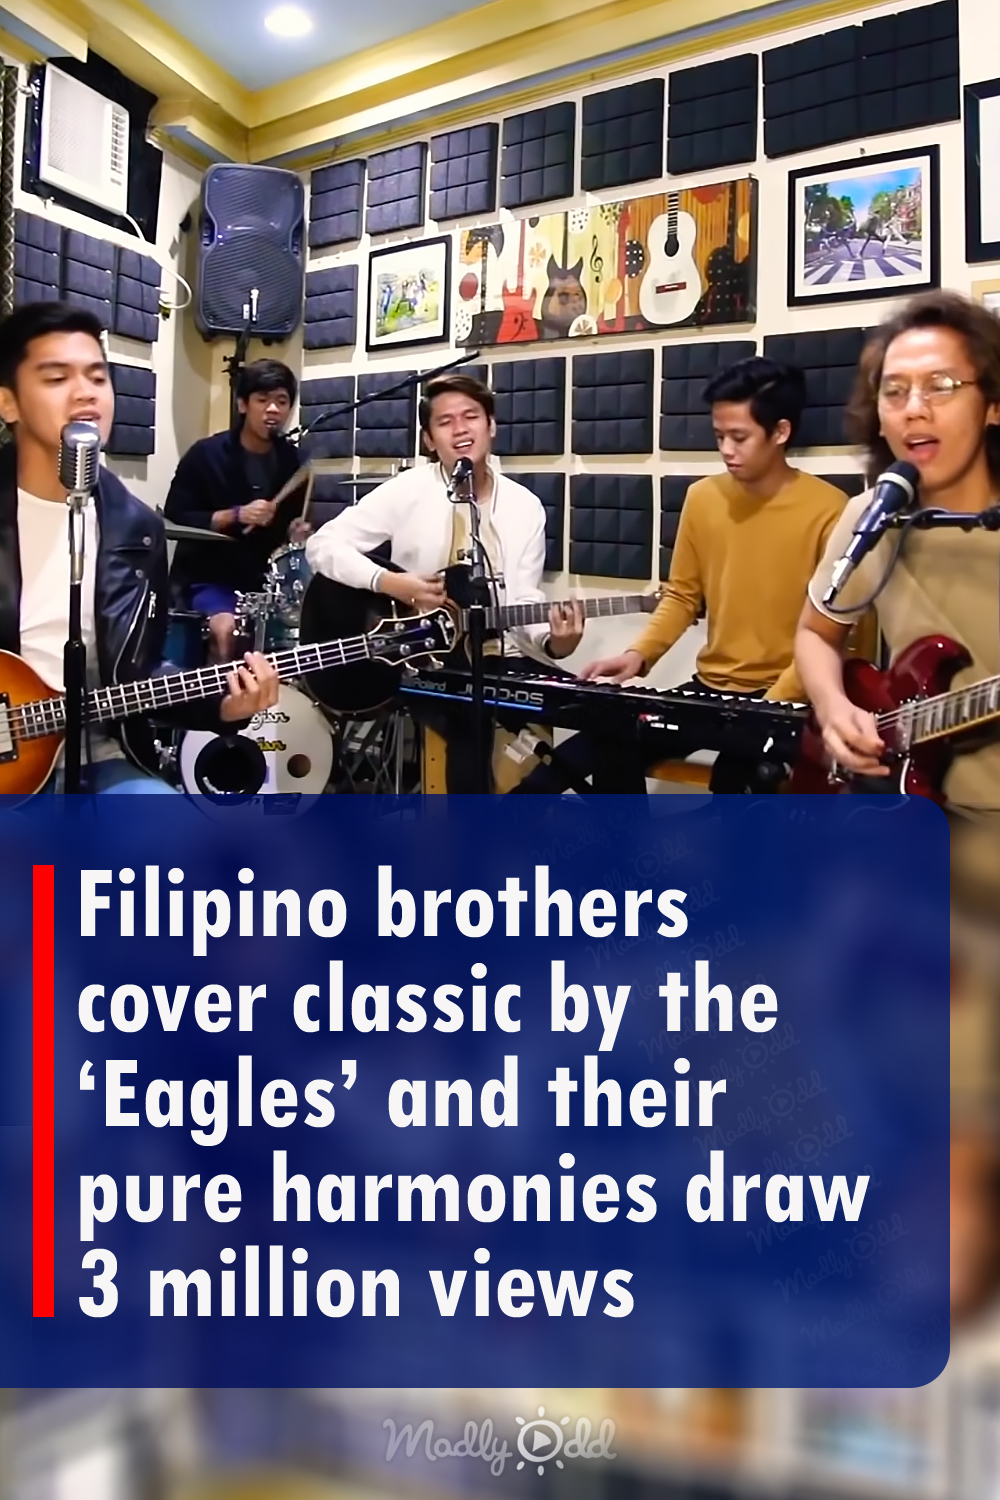 Filipino brothers cover classic by the \'Eagles’ and their pure harmonies draw 3 million views